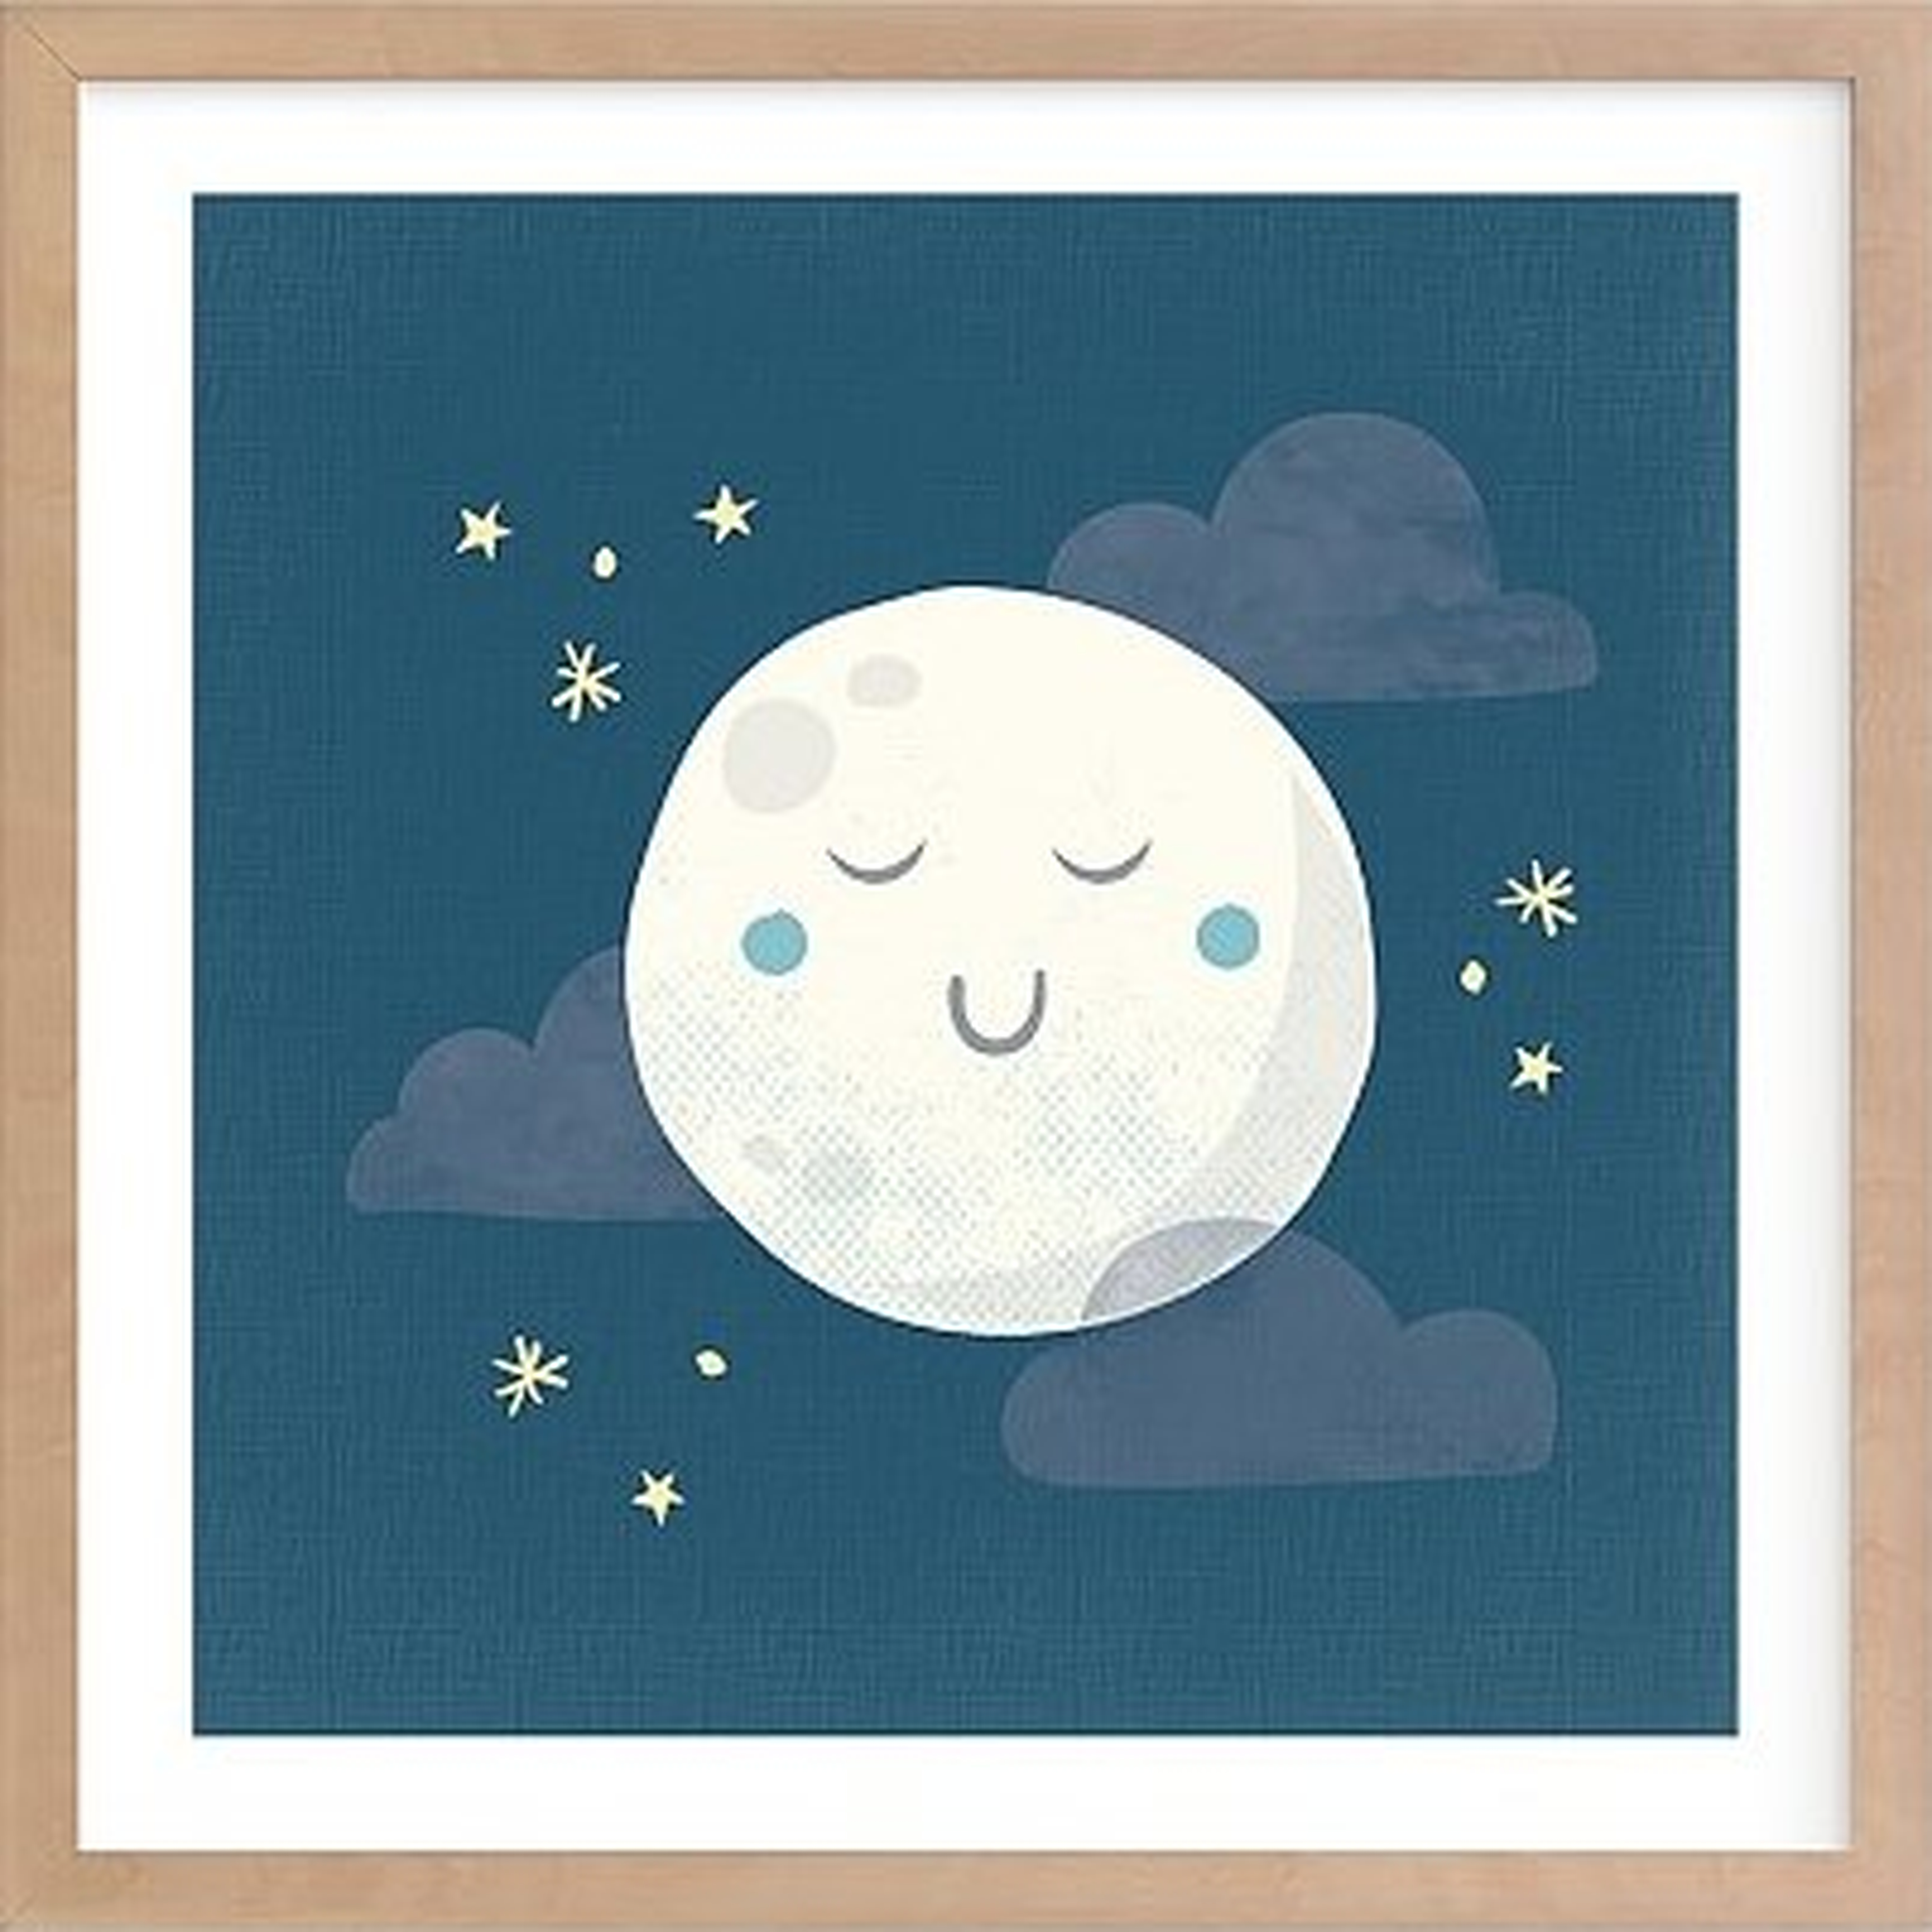 Goodnight Moon Wall Art by Minted(R) 24x24, Natural - Pottery Barn Kids